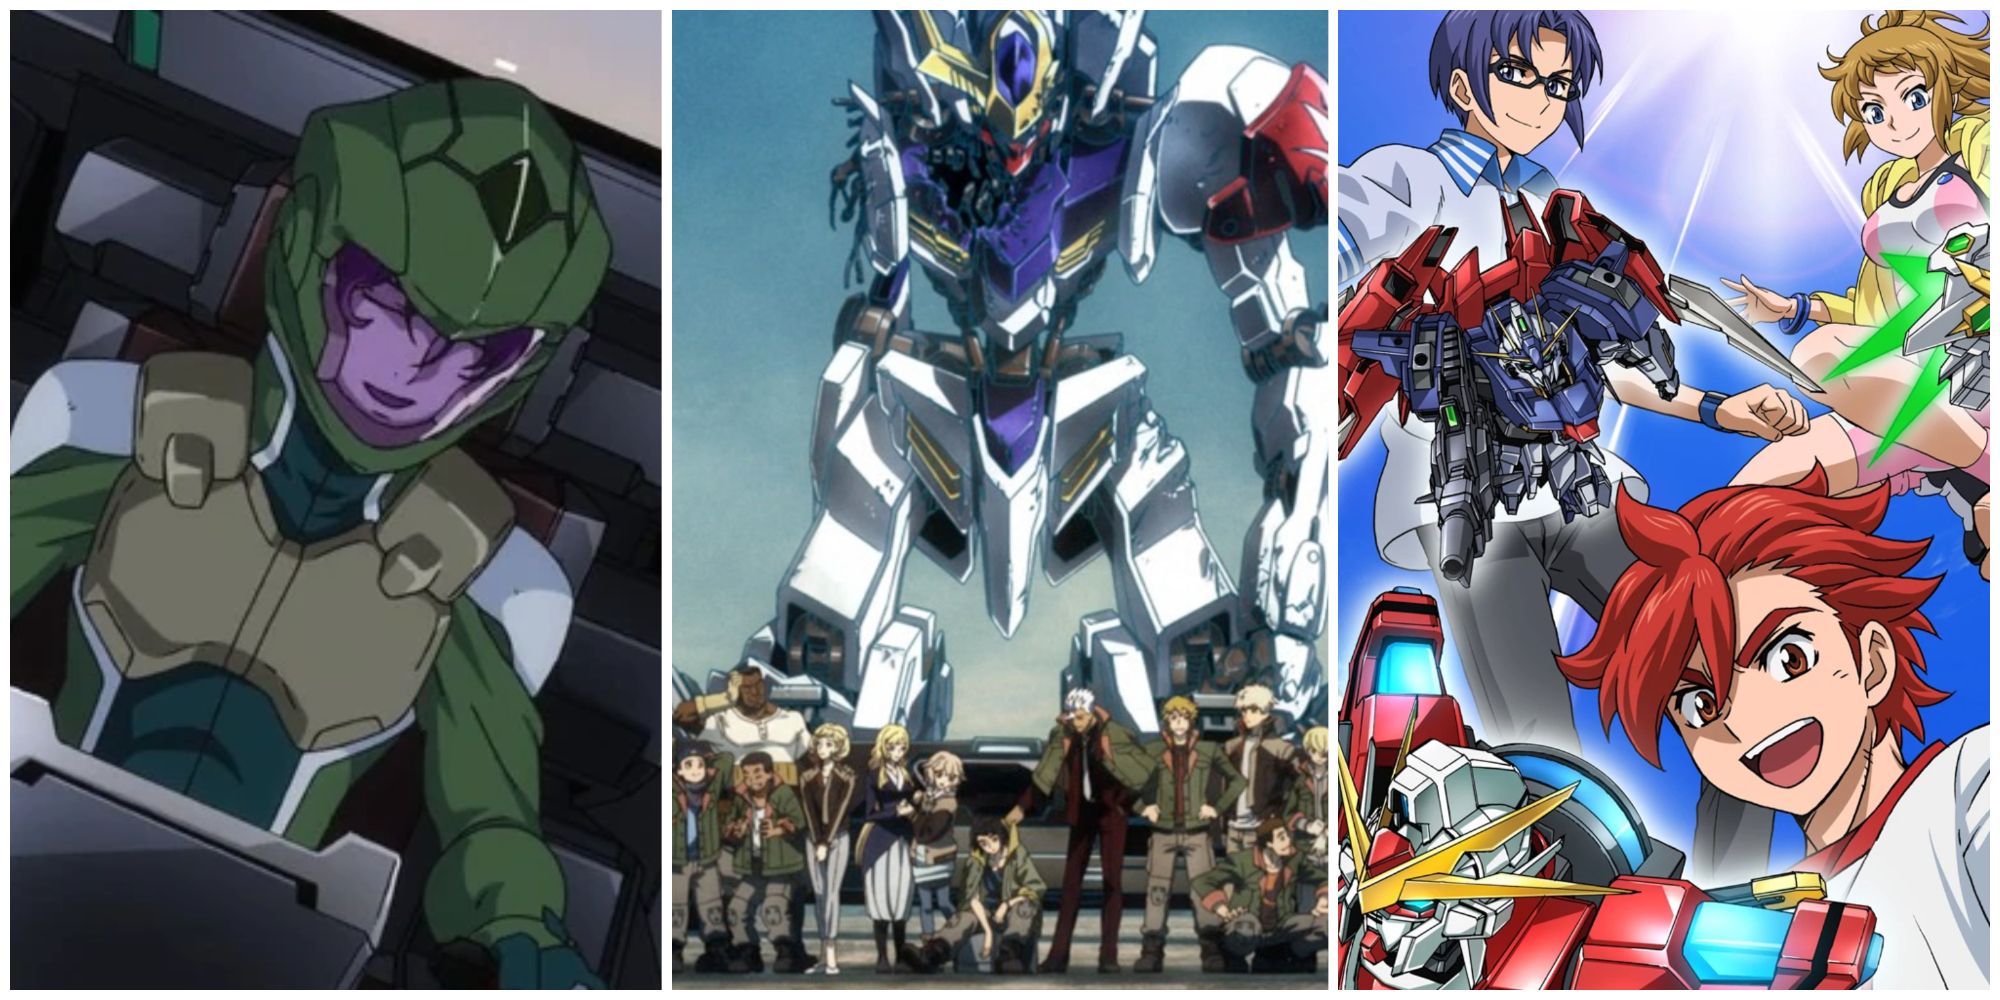 Banner image showing previous Gundam series, including Gundam 00, Iron-Blooded Orphans, and Build Fighters Try